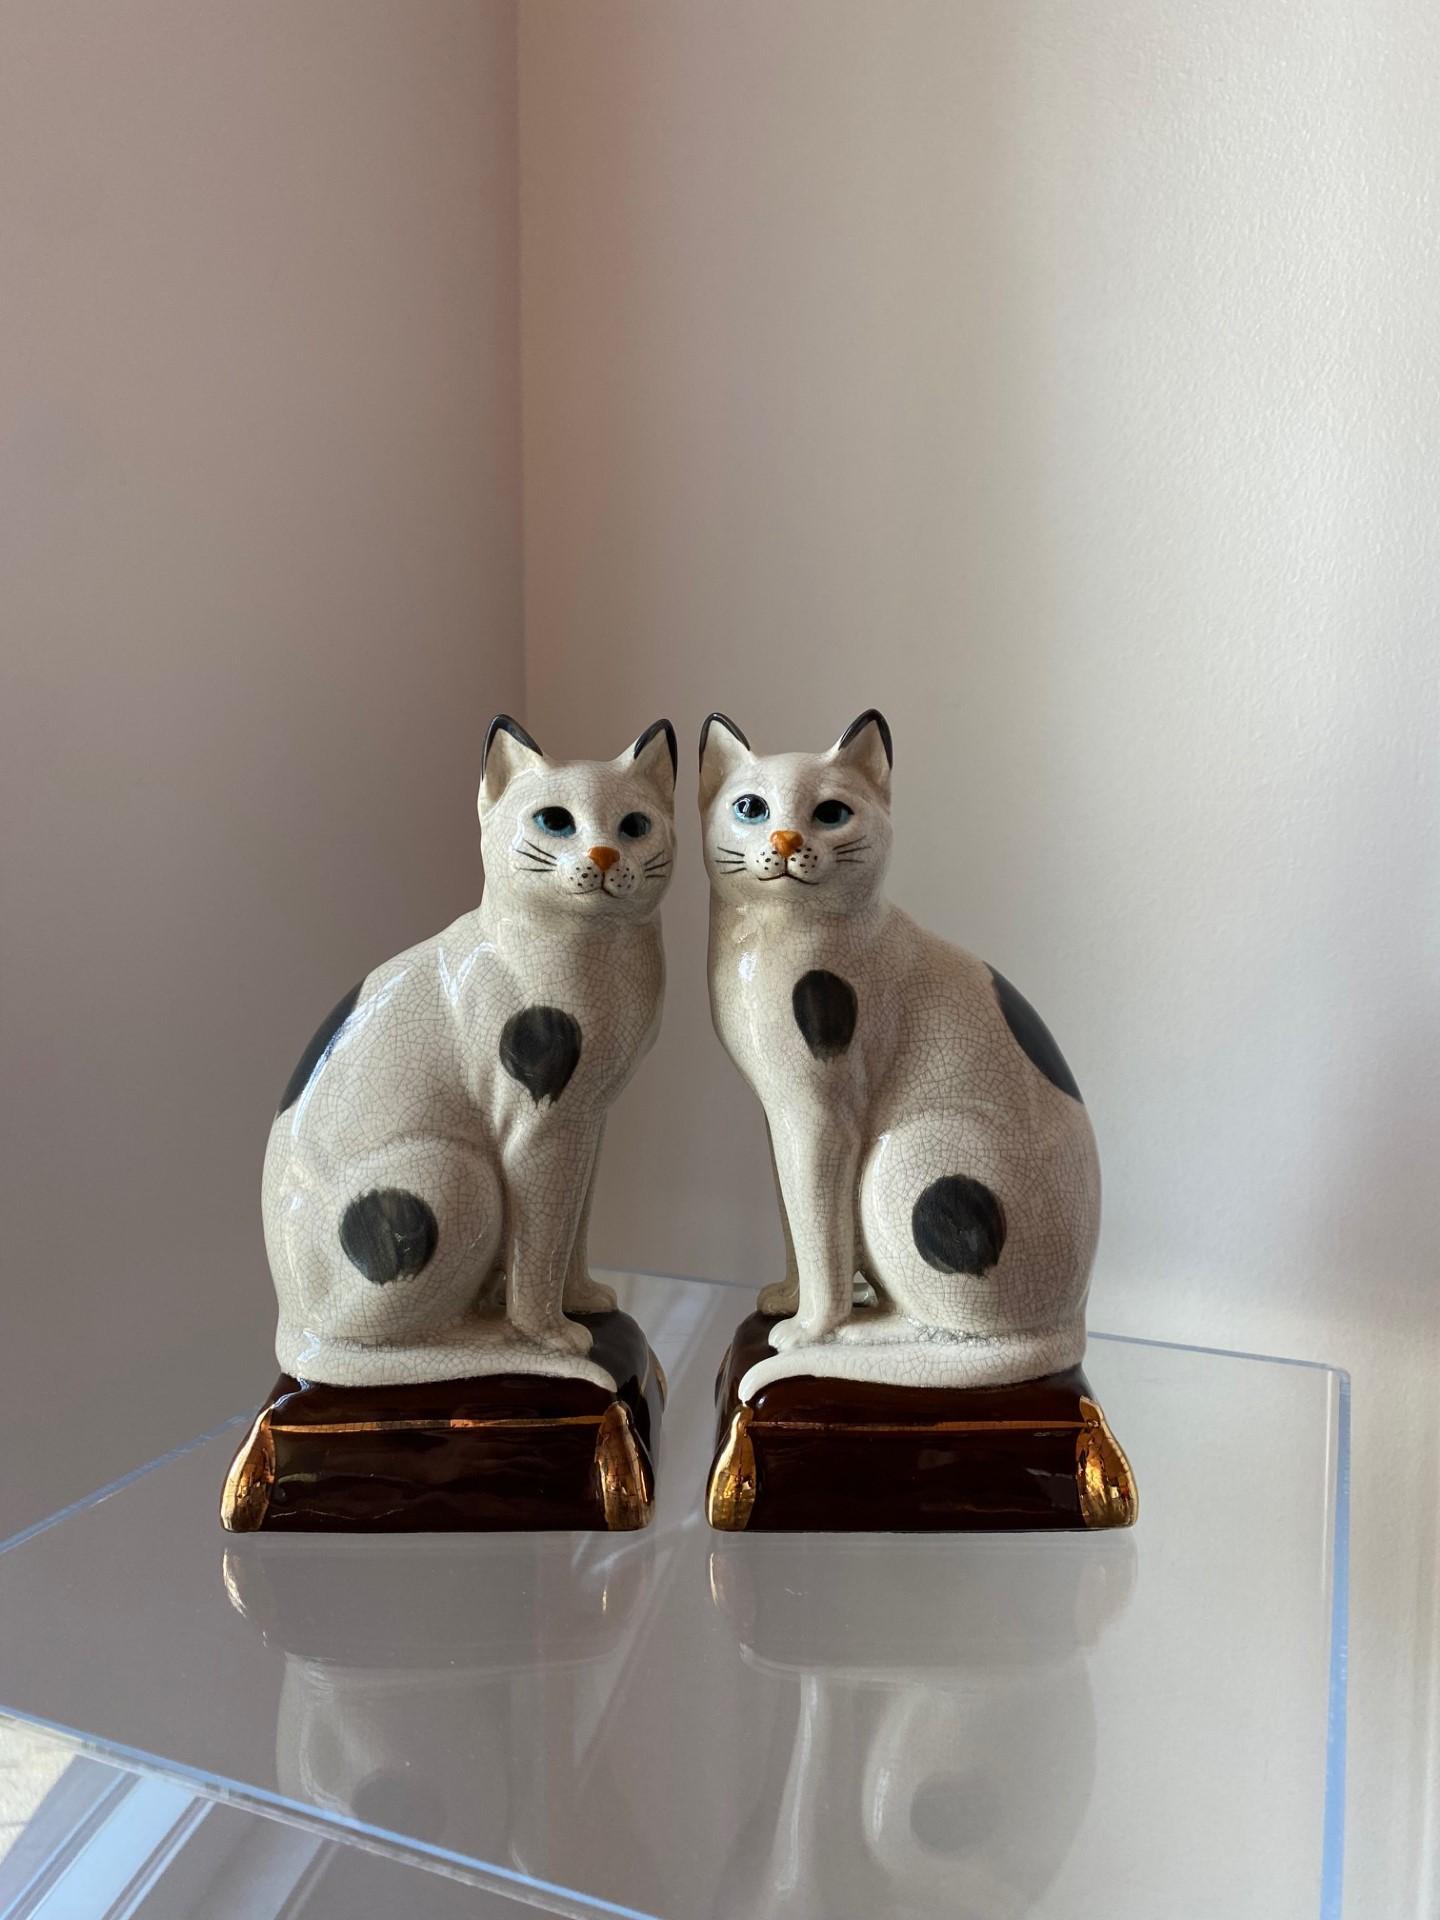 Fabulous pair of porcelain Takahashi cats in white with black blotches sitting on cushions with gold trim and tassels. Underneath the protective felt pad is a hole which the company purposely made so that pebbles or sand could be filled to add